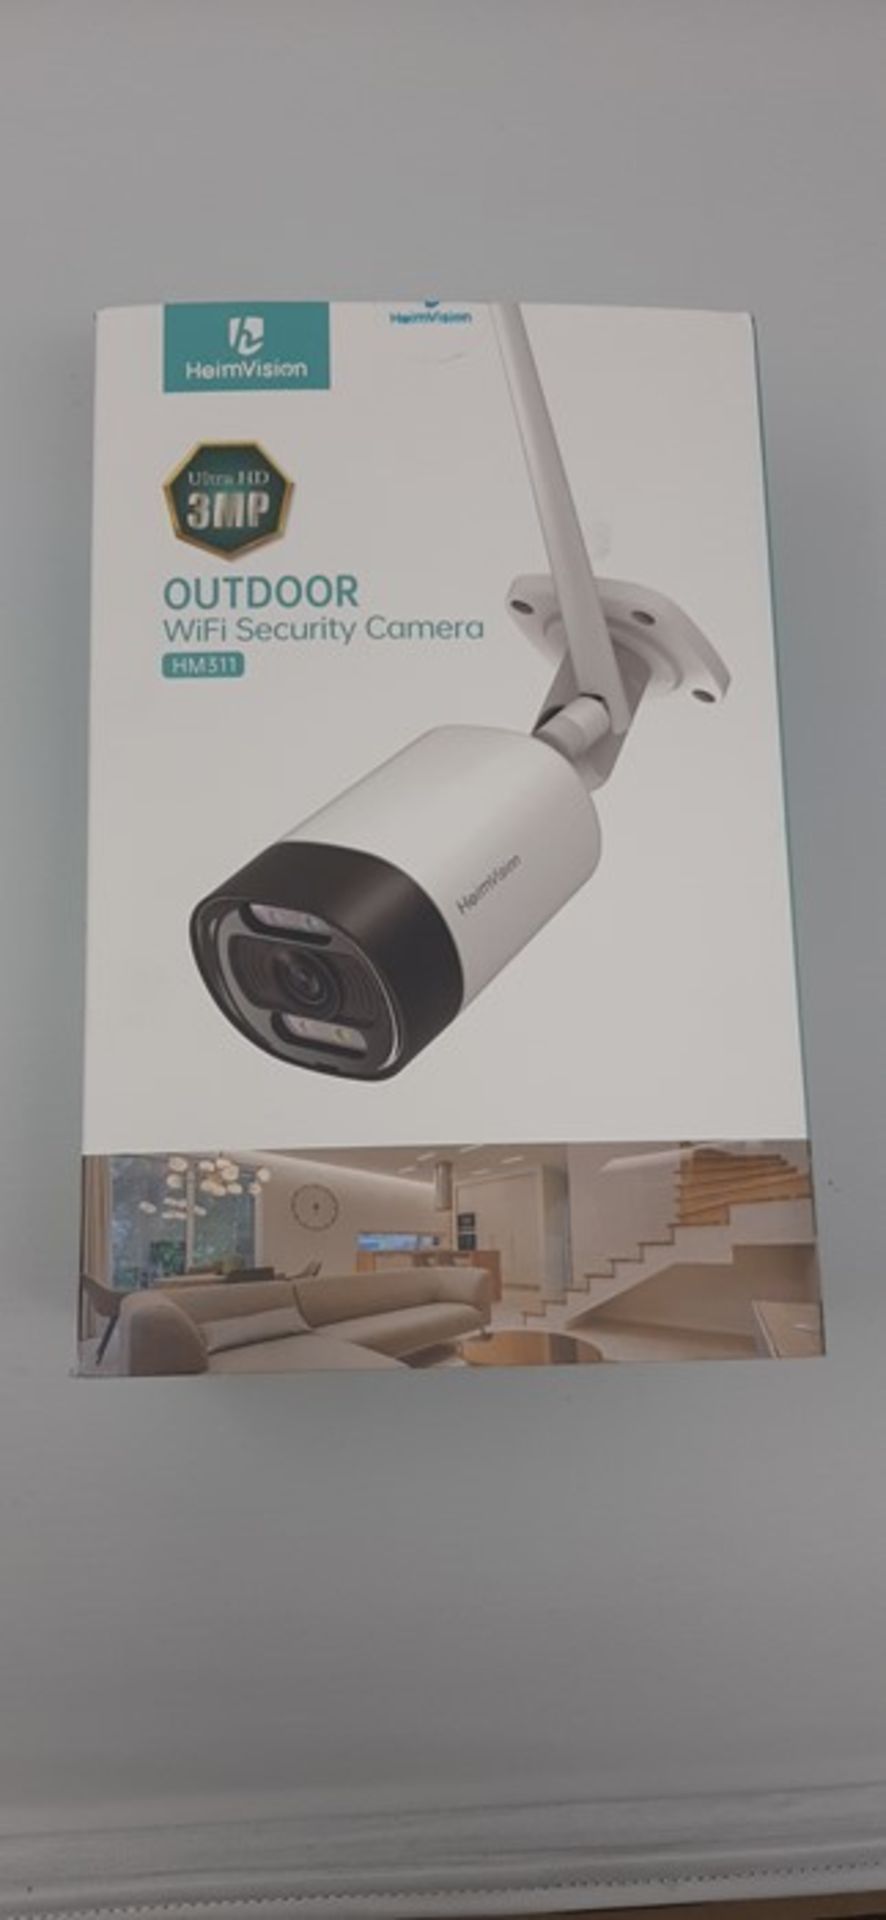 HeimVision HM311 3MP Outdoor Security Camera, 2K CCTV Wireless WiFi Home Bullet Camera with Flo - Image 2 of 2